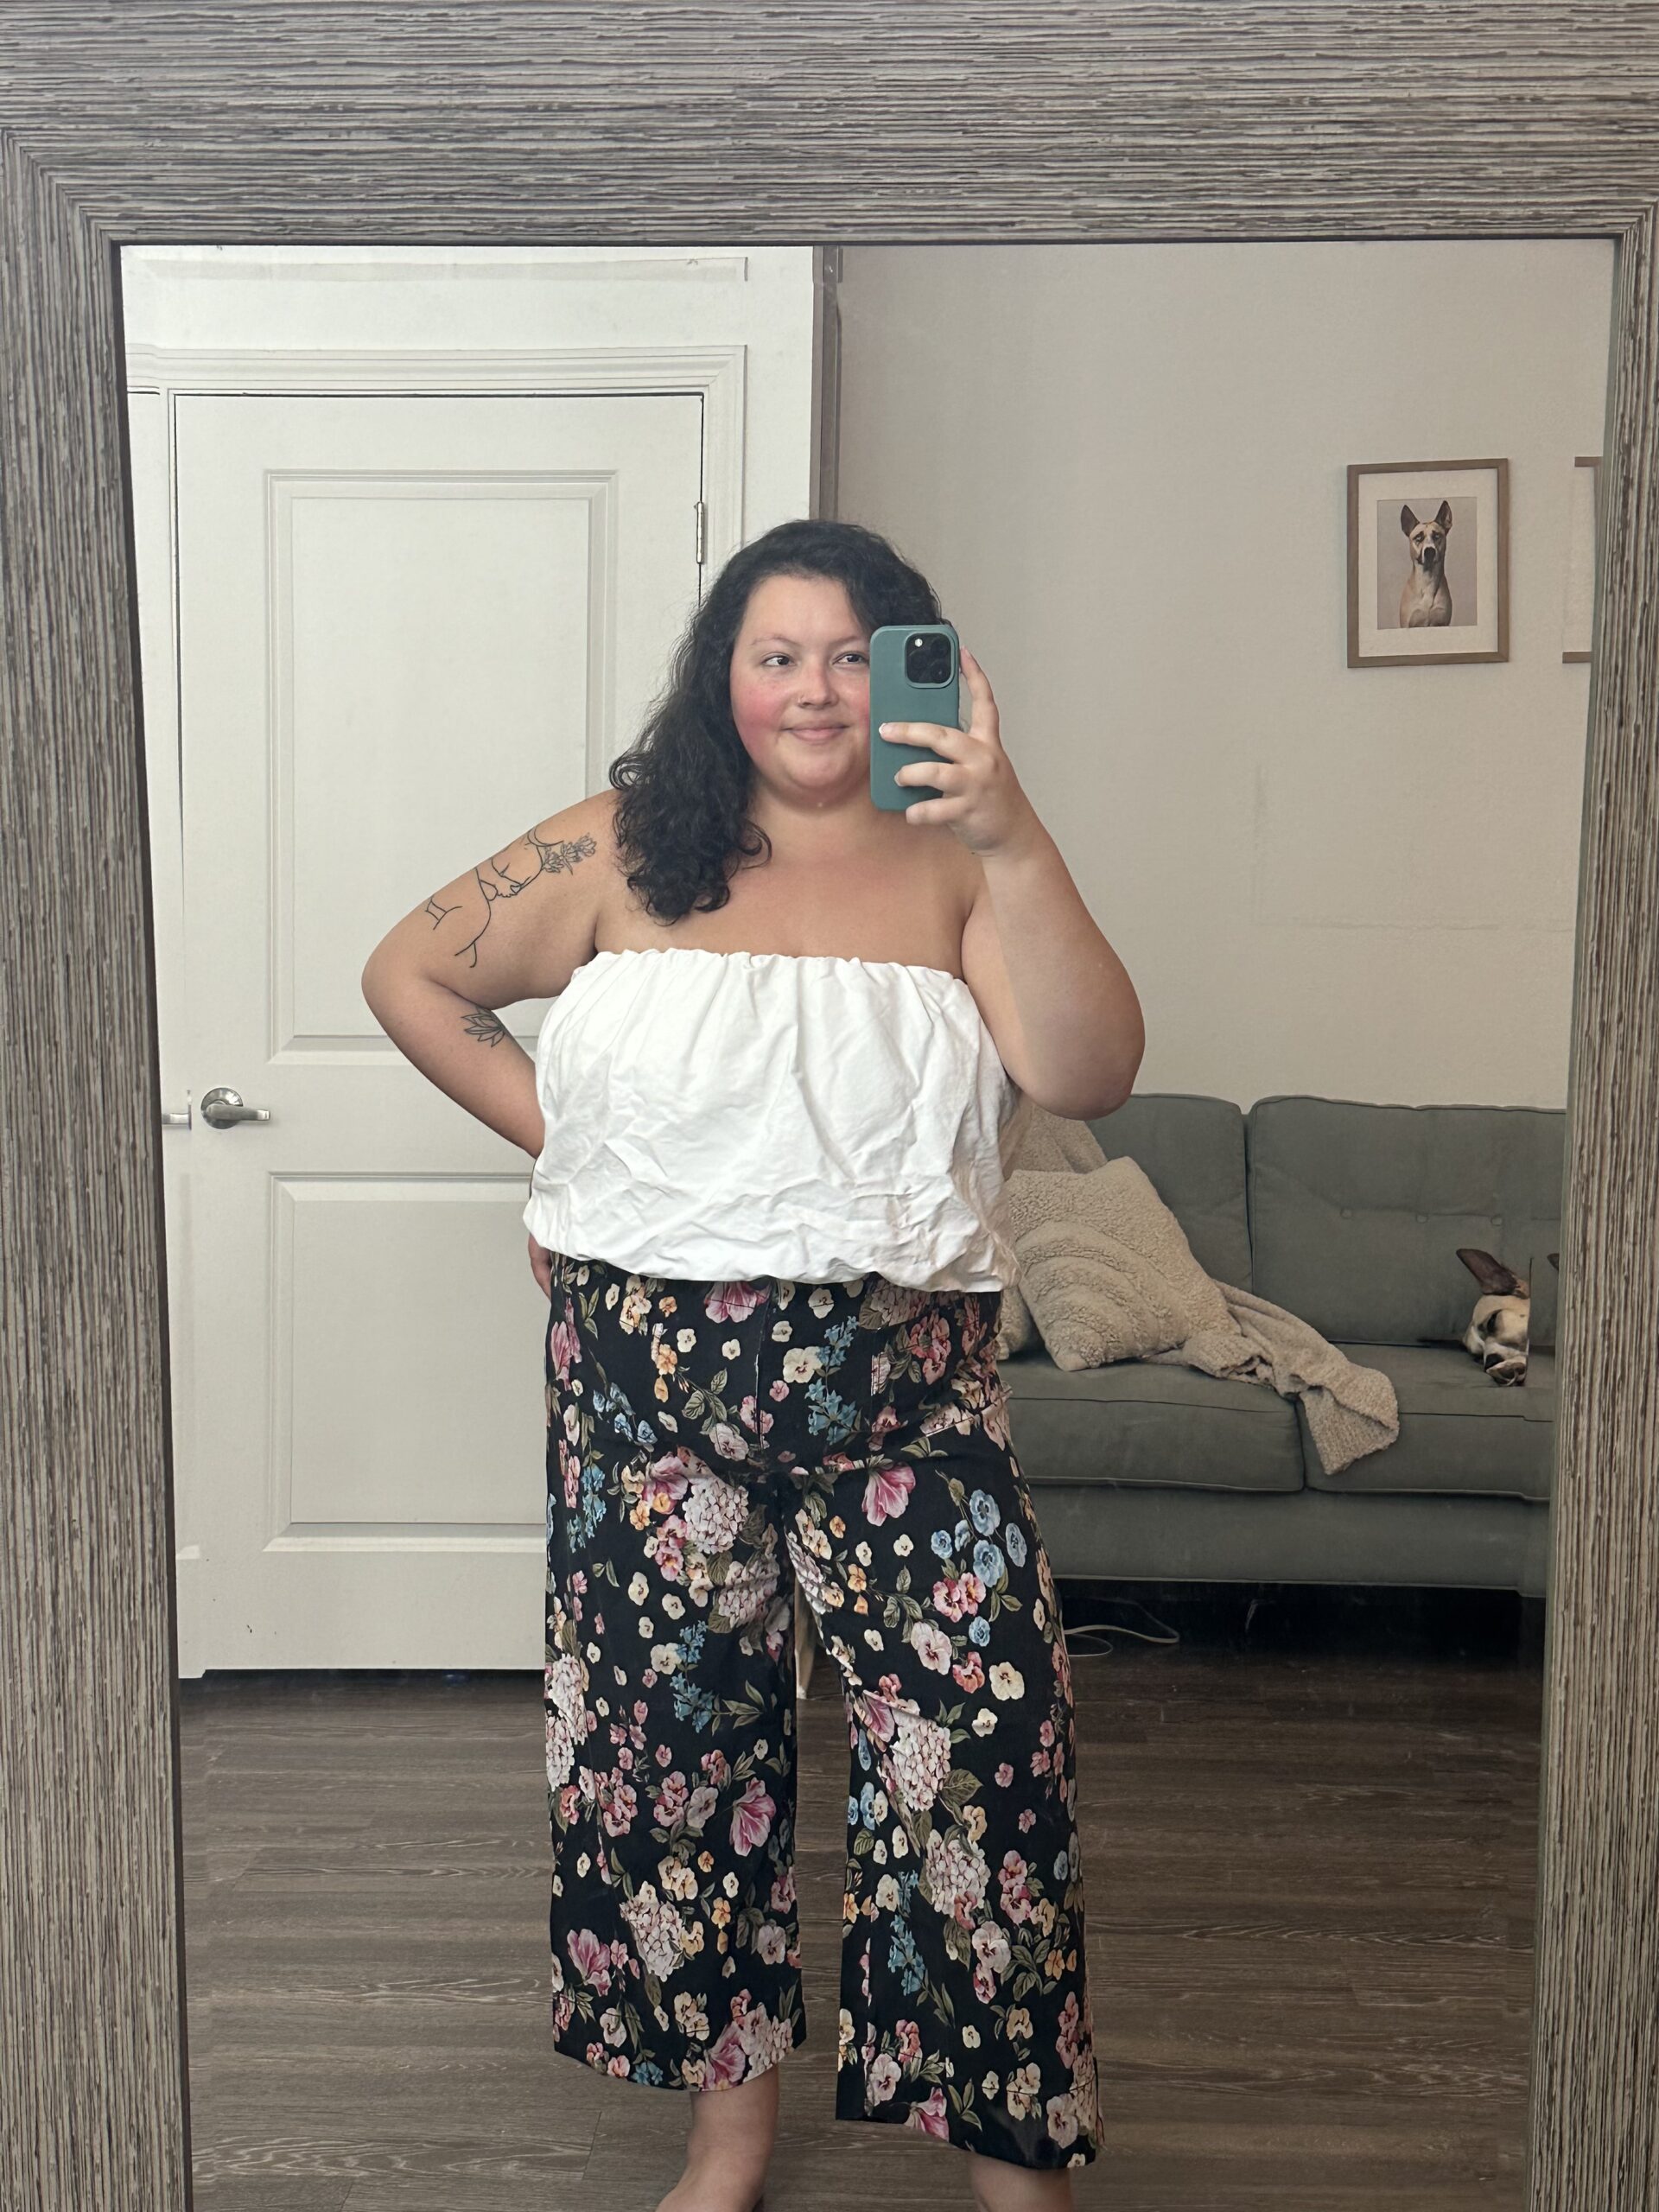 Woman in a white top and floral pants taking a mirror selfie in a room with a couch and framed picture in the background.